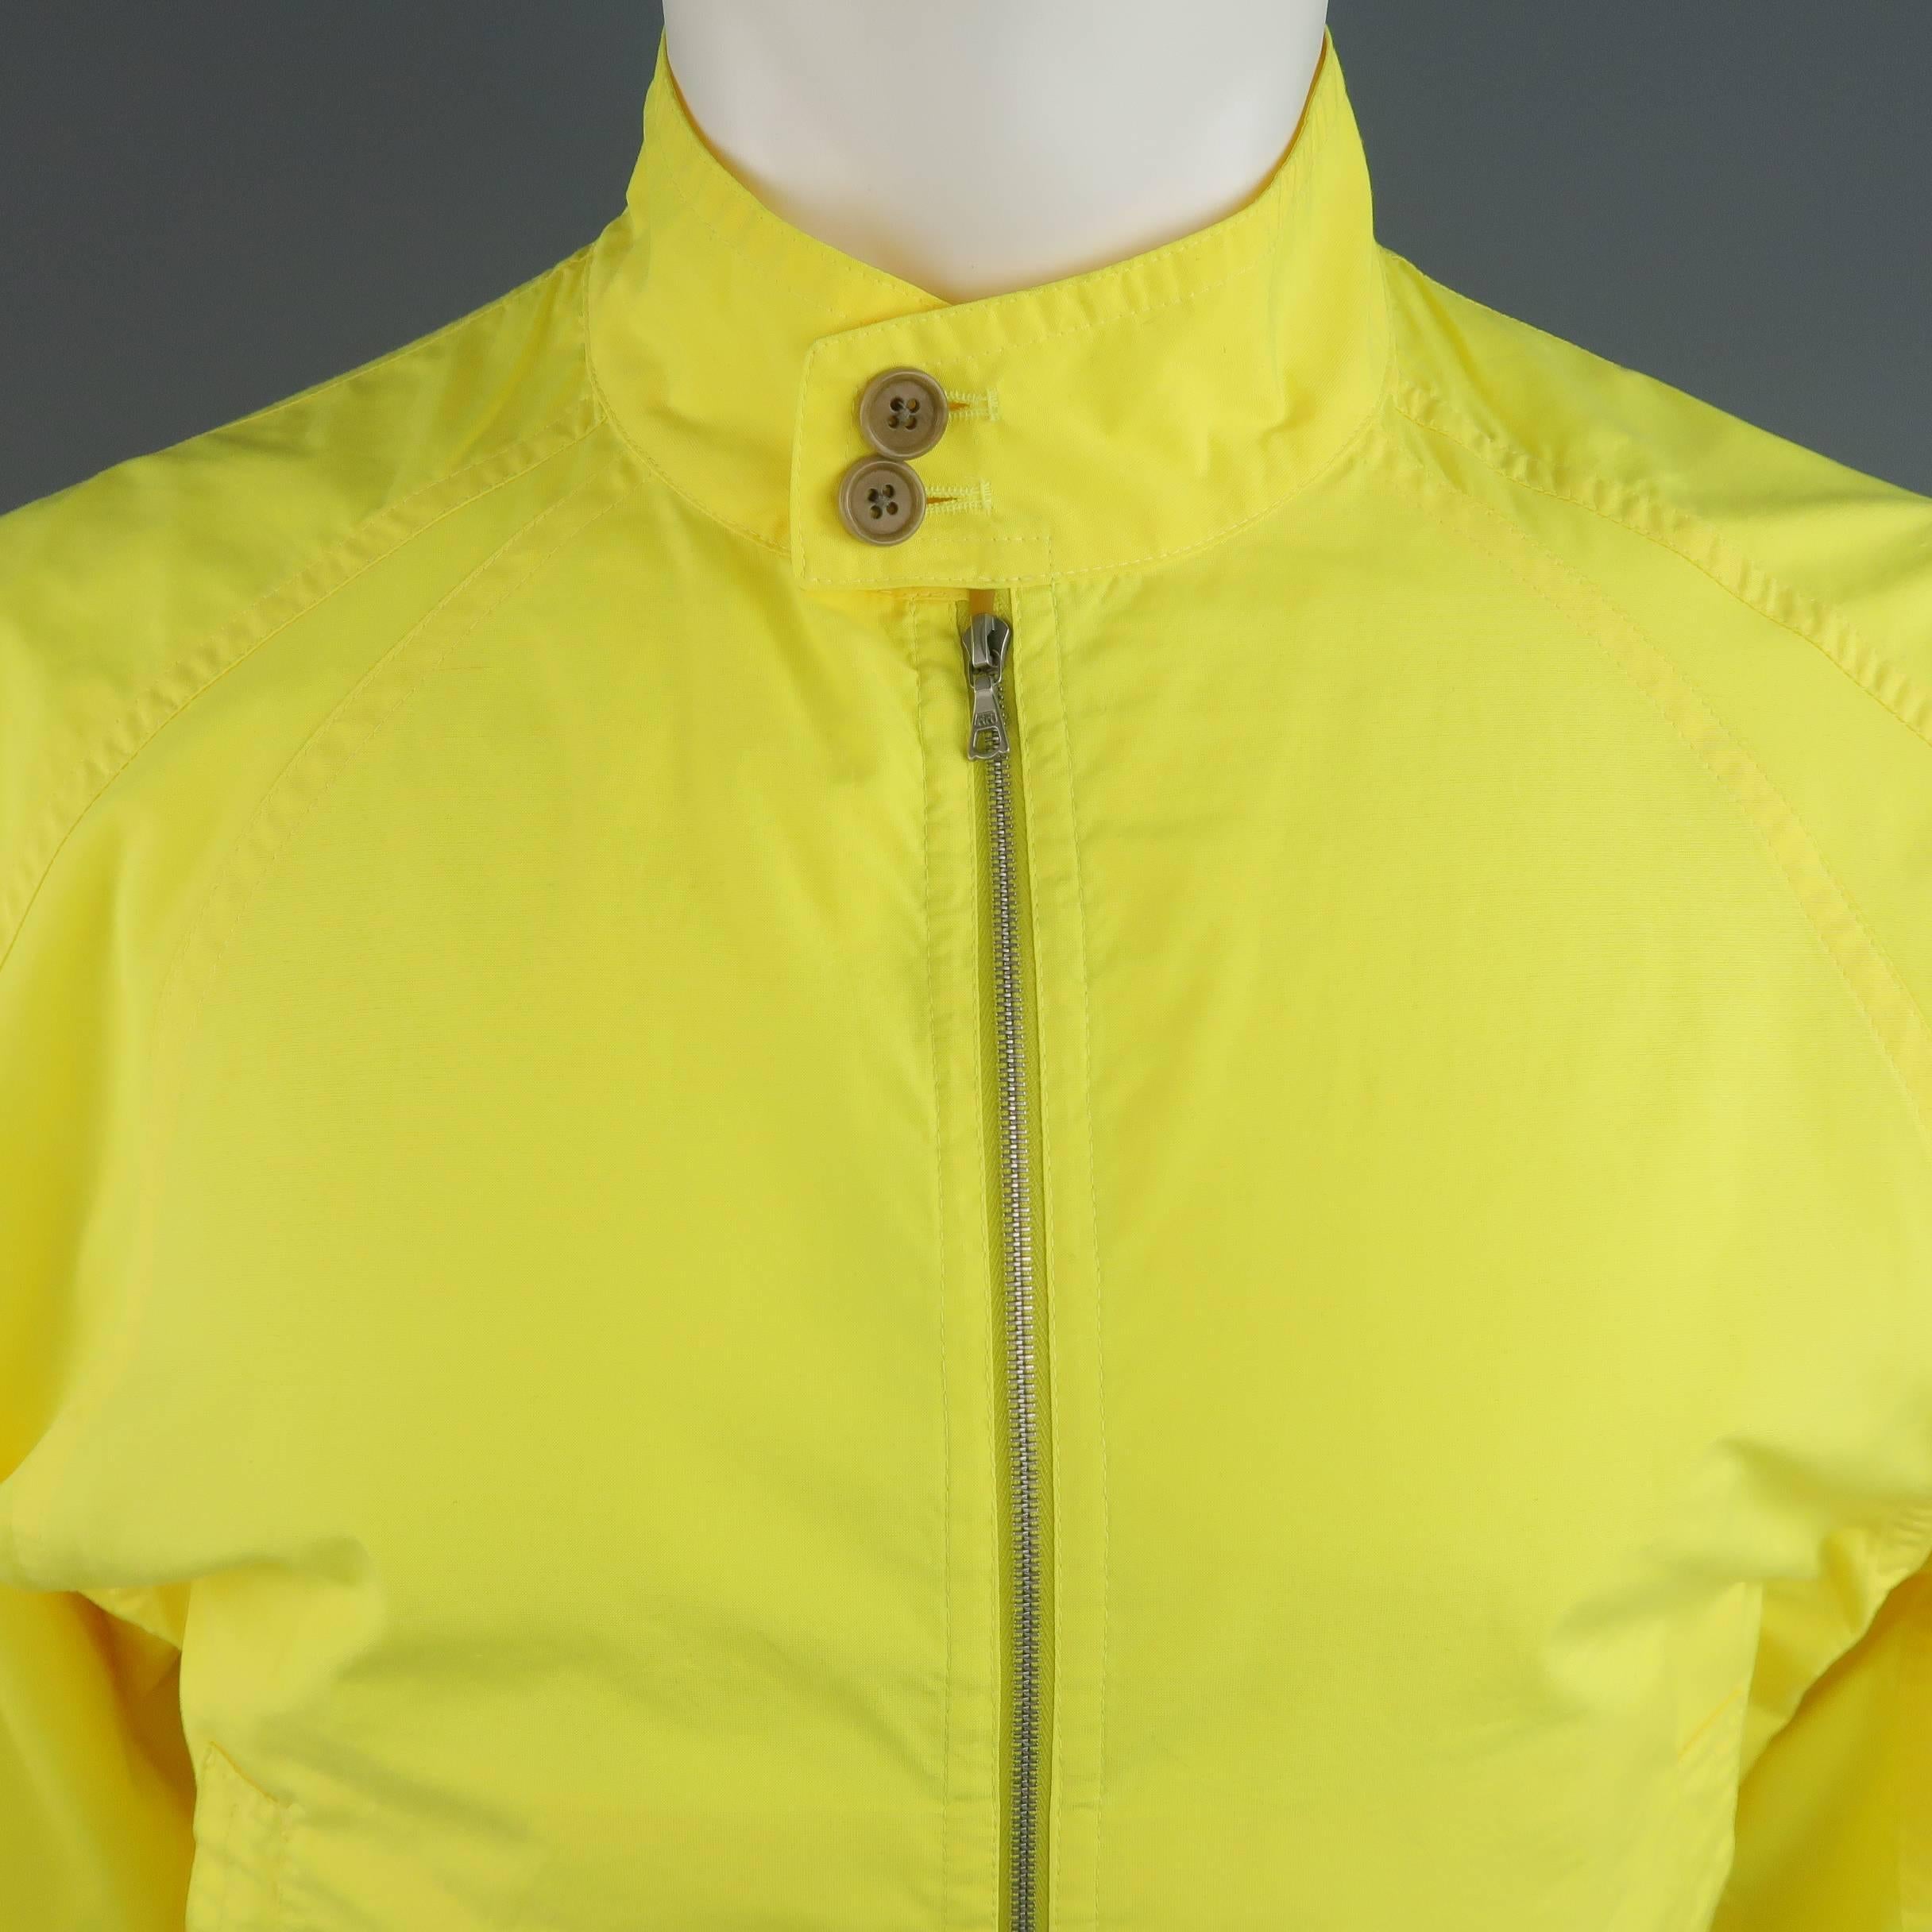 DRIES VAN NOTEN bomber jacket comes in a bold yellow cotton blend canvas and features a high, button over collar, double zip front, slit pockets, elastic cuffs, and raglan sleeves.
 
Excellent Pre-Owned Condition.
Marked: Small
 
Measurements:
